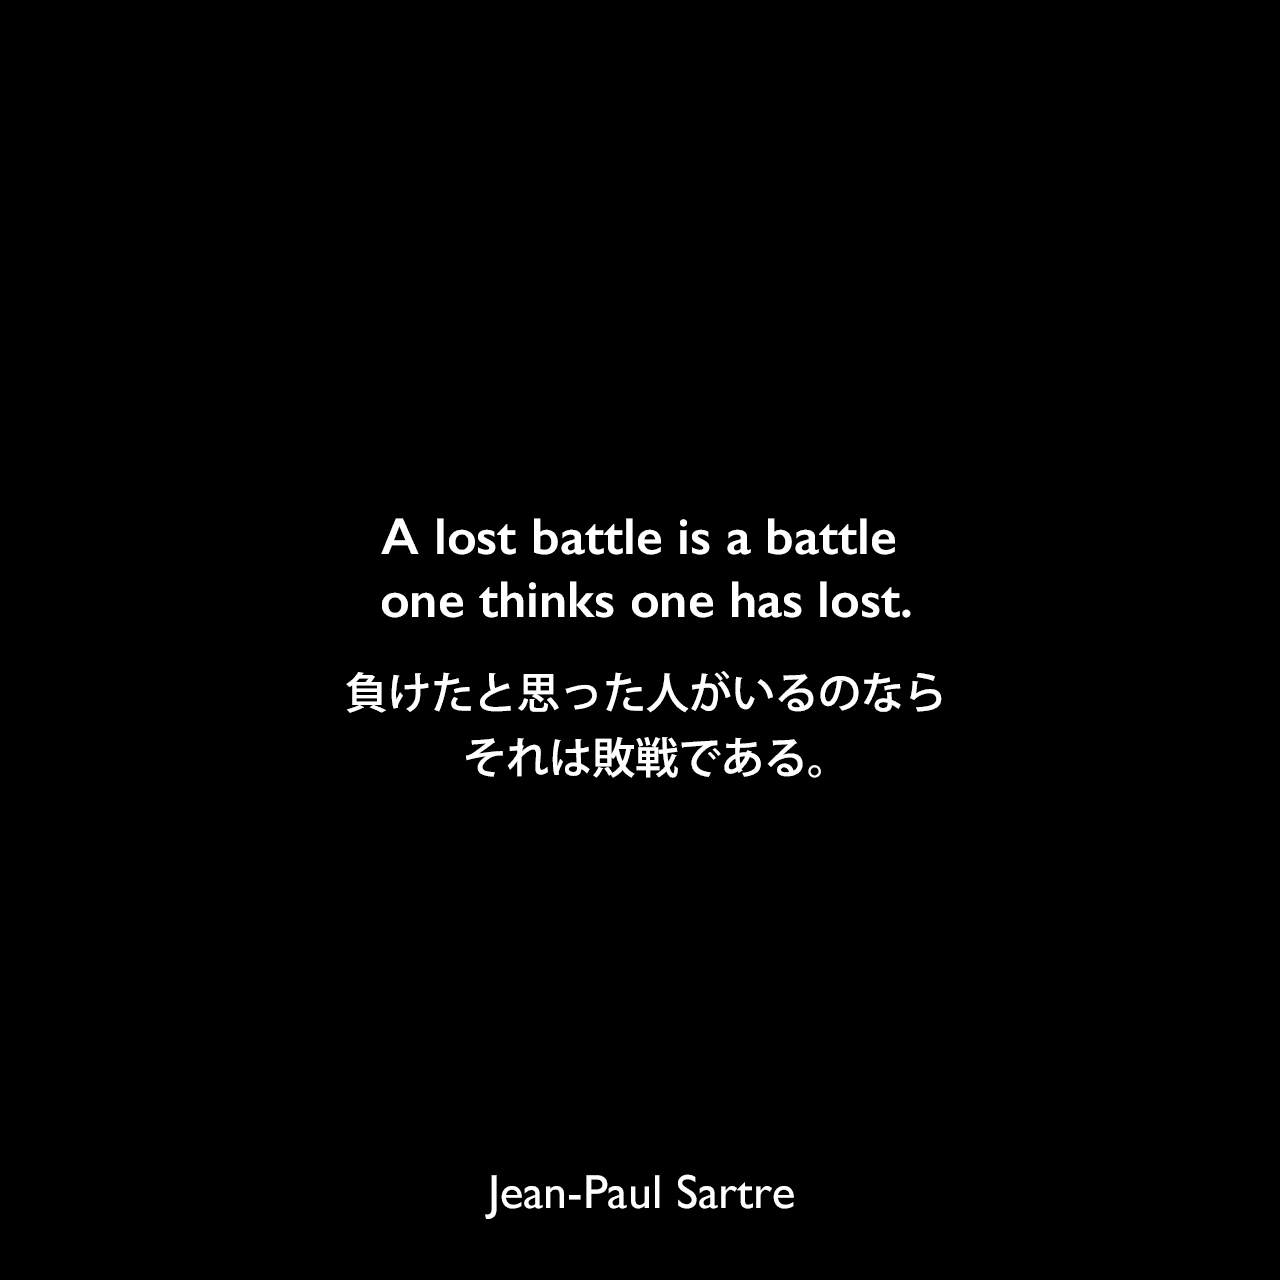 A lost battle is a battle one thinks one has lost.負けたと思った人がいるのなら、それは敗戦である。Jean-Paul Sartre